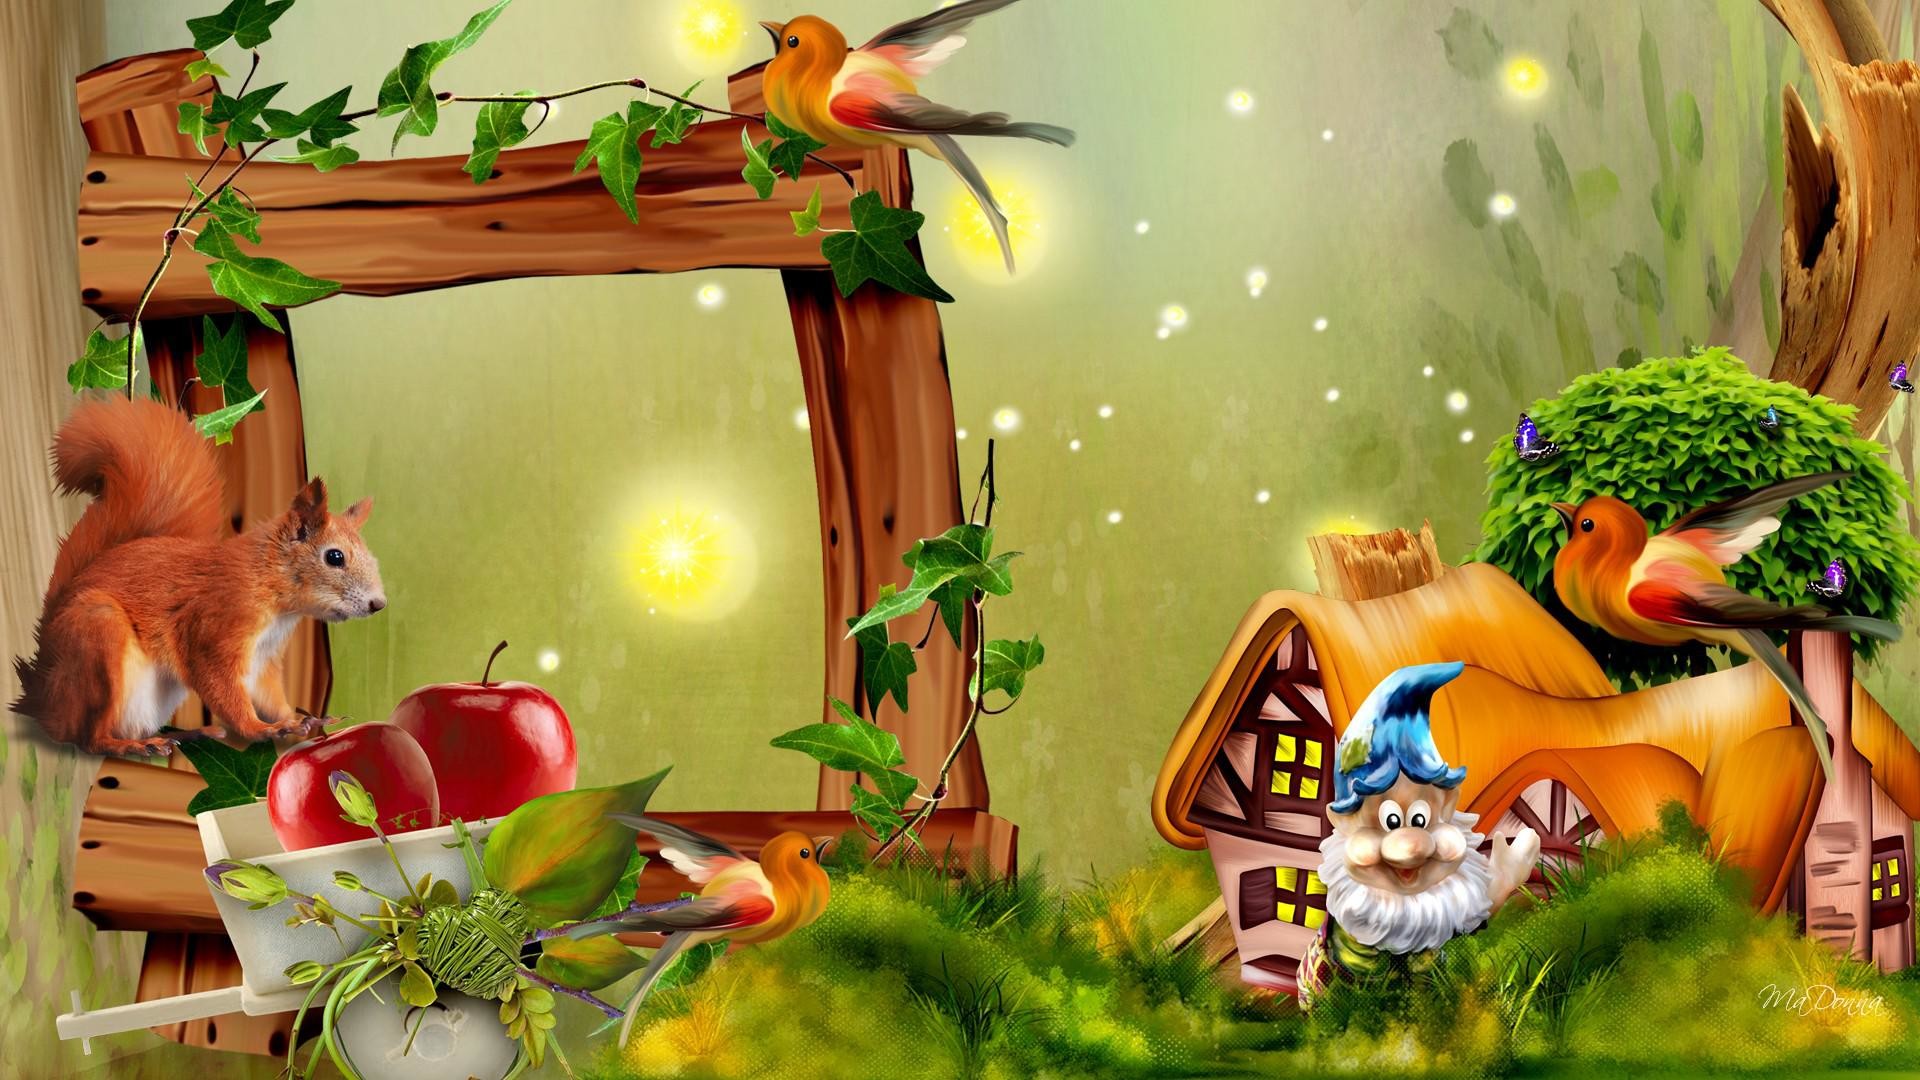 1920x1080 Gnome village 134567 High Quality and Resolution Wallpapers on 